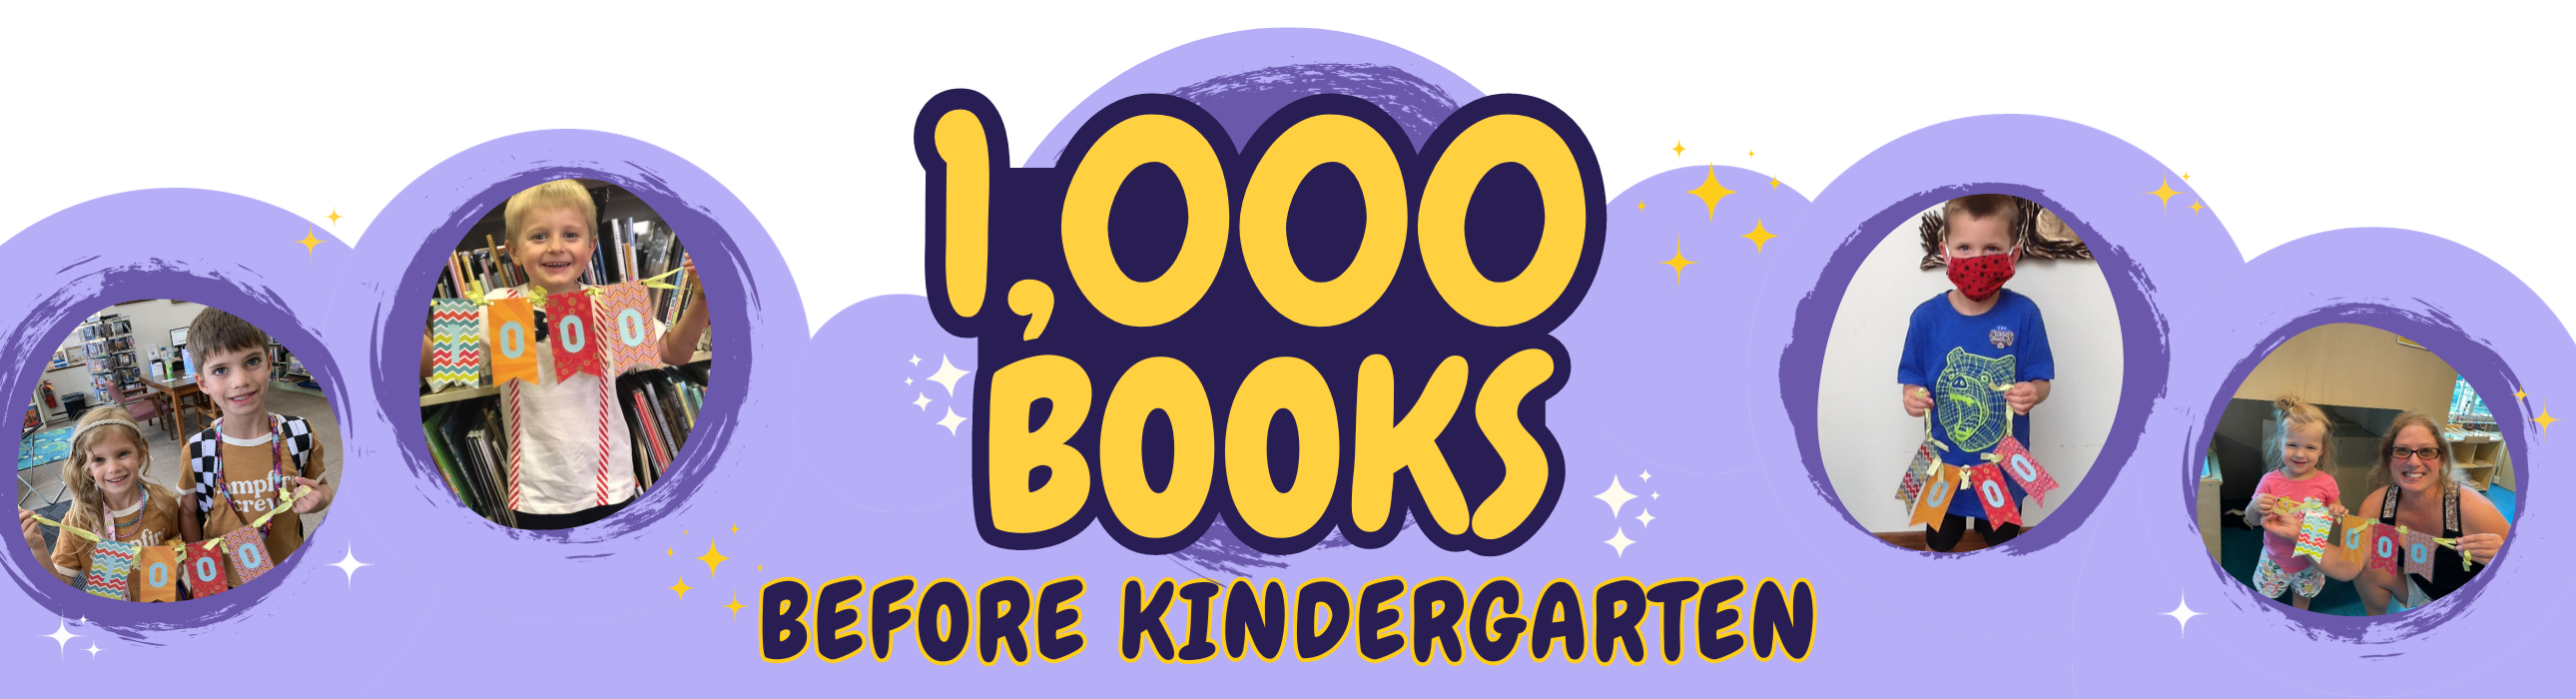 kids in purple bubbles holding with text: 1000 Books before Kindergarten